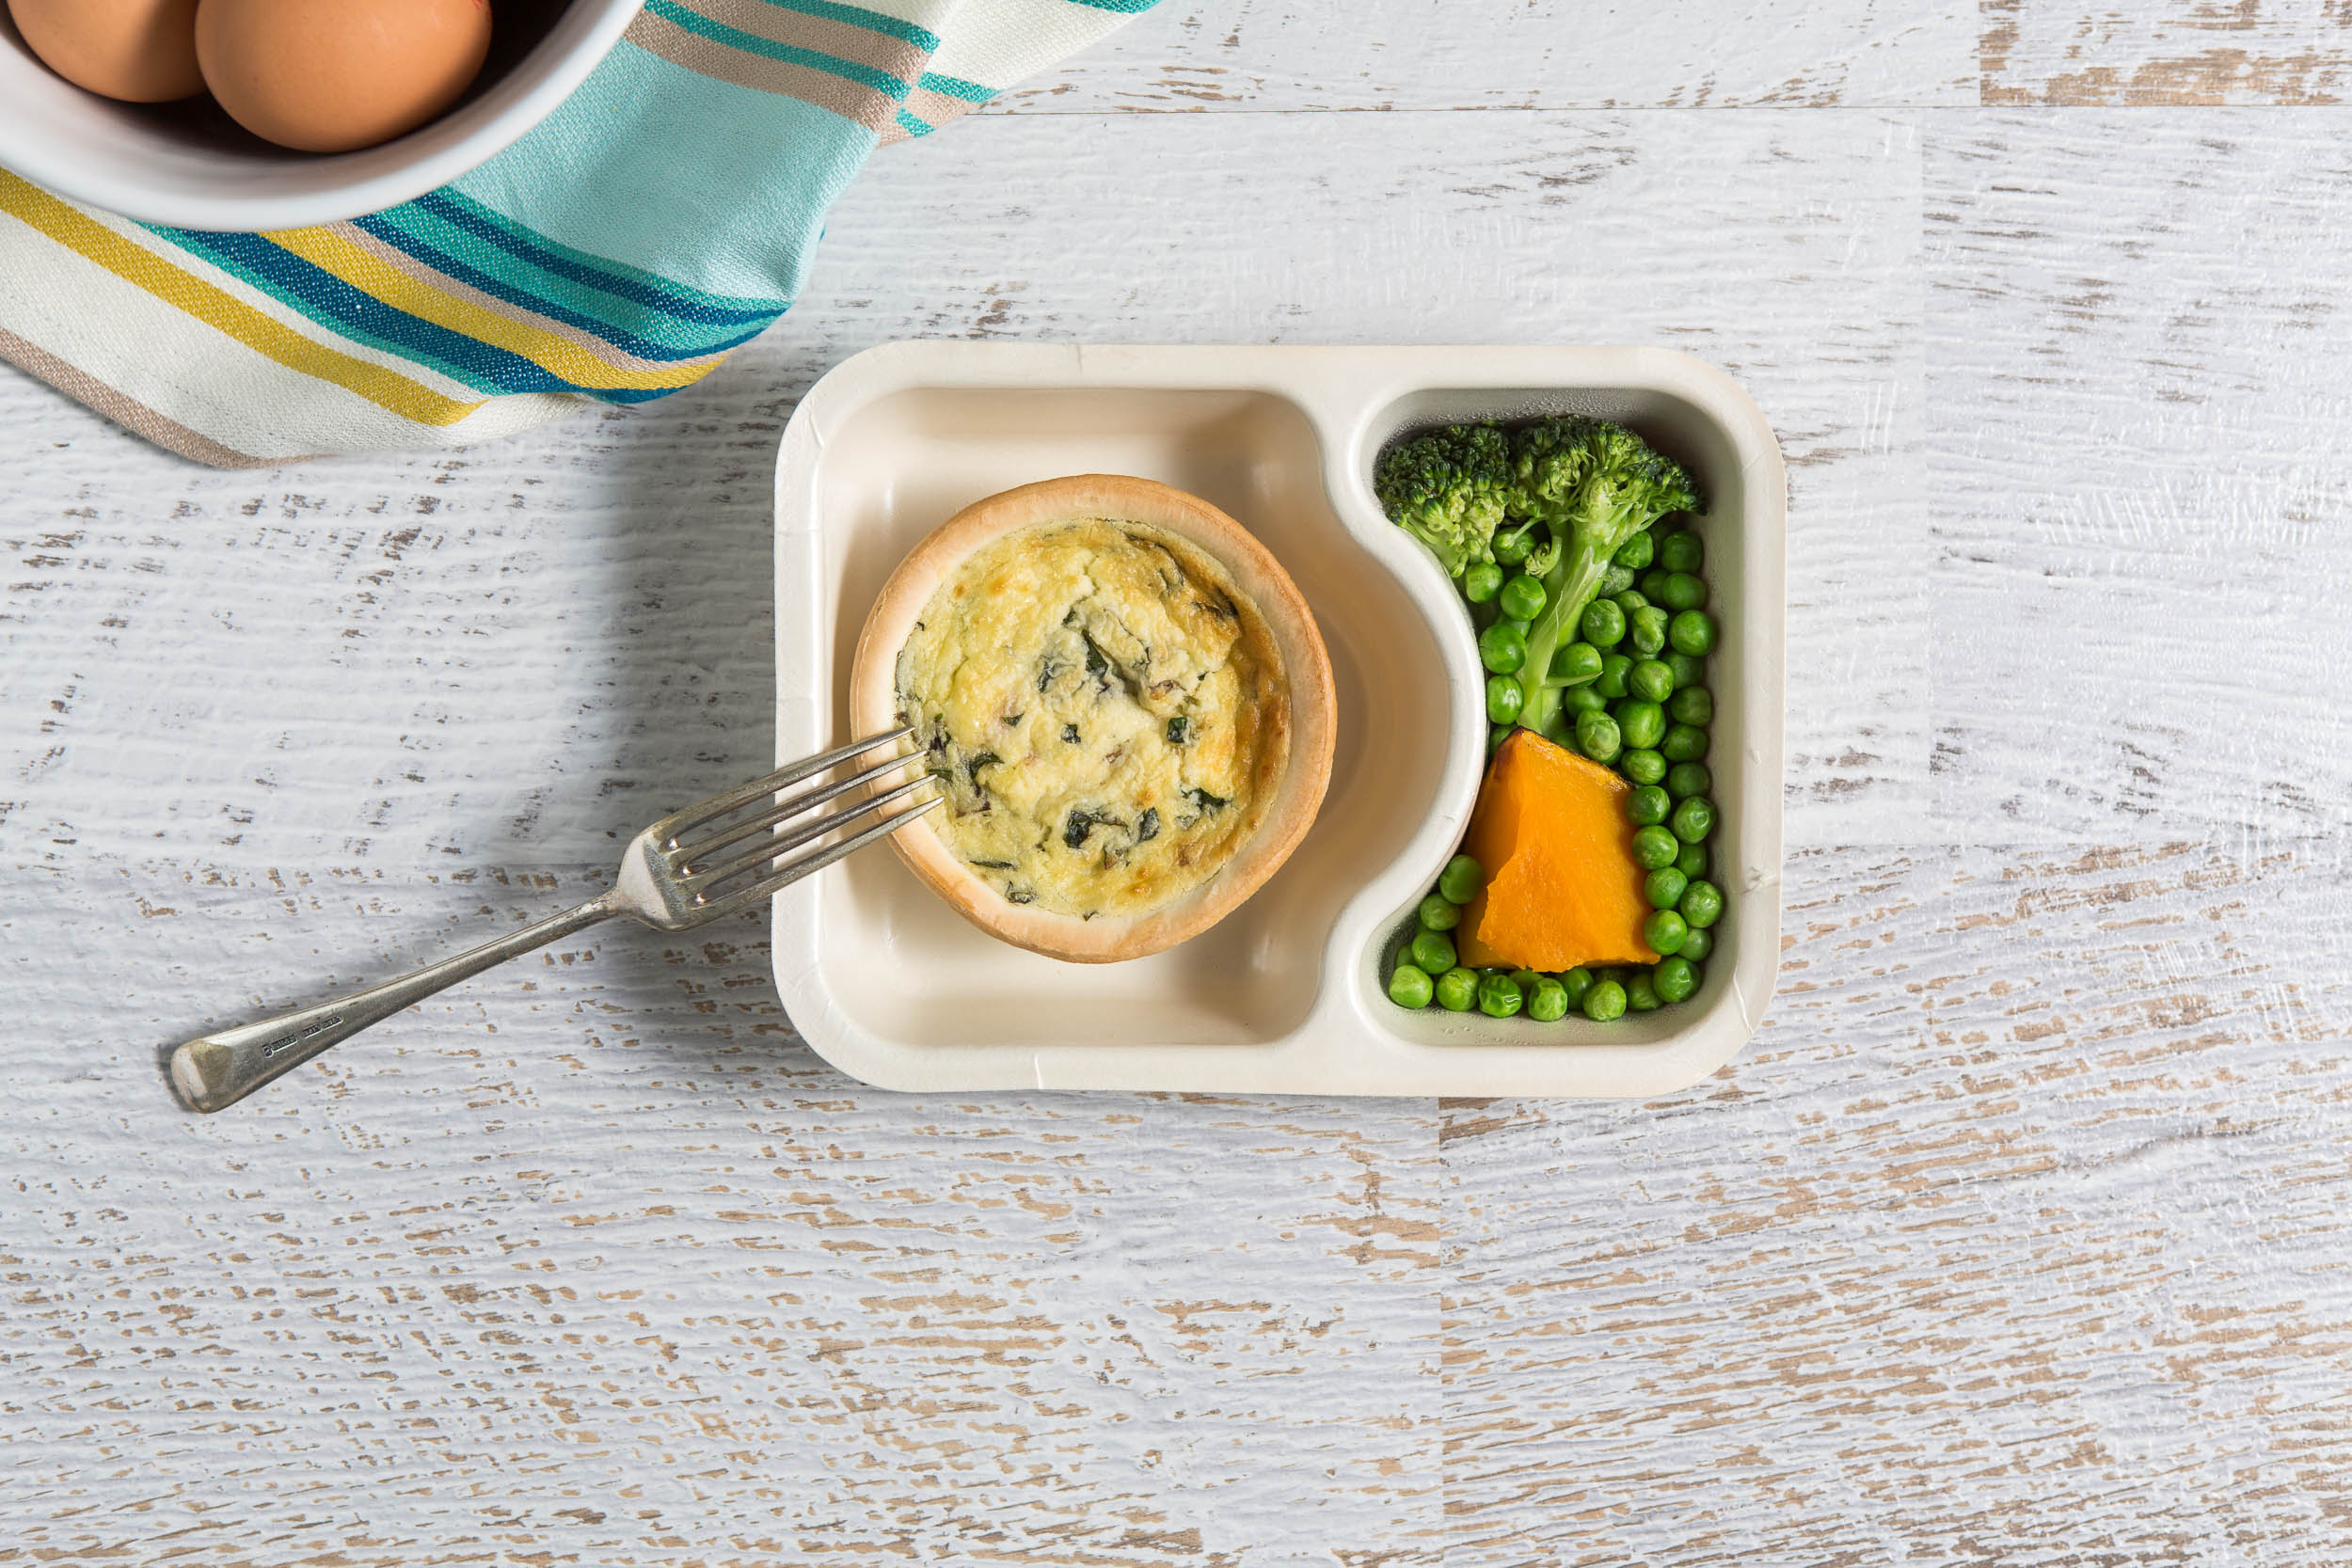 Savor the flavors of our nutritious Quiche & Seasonal Vegetables, a convenient single-serving meal option for any mealtime